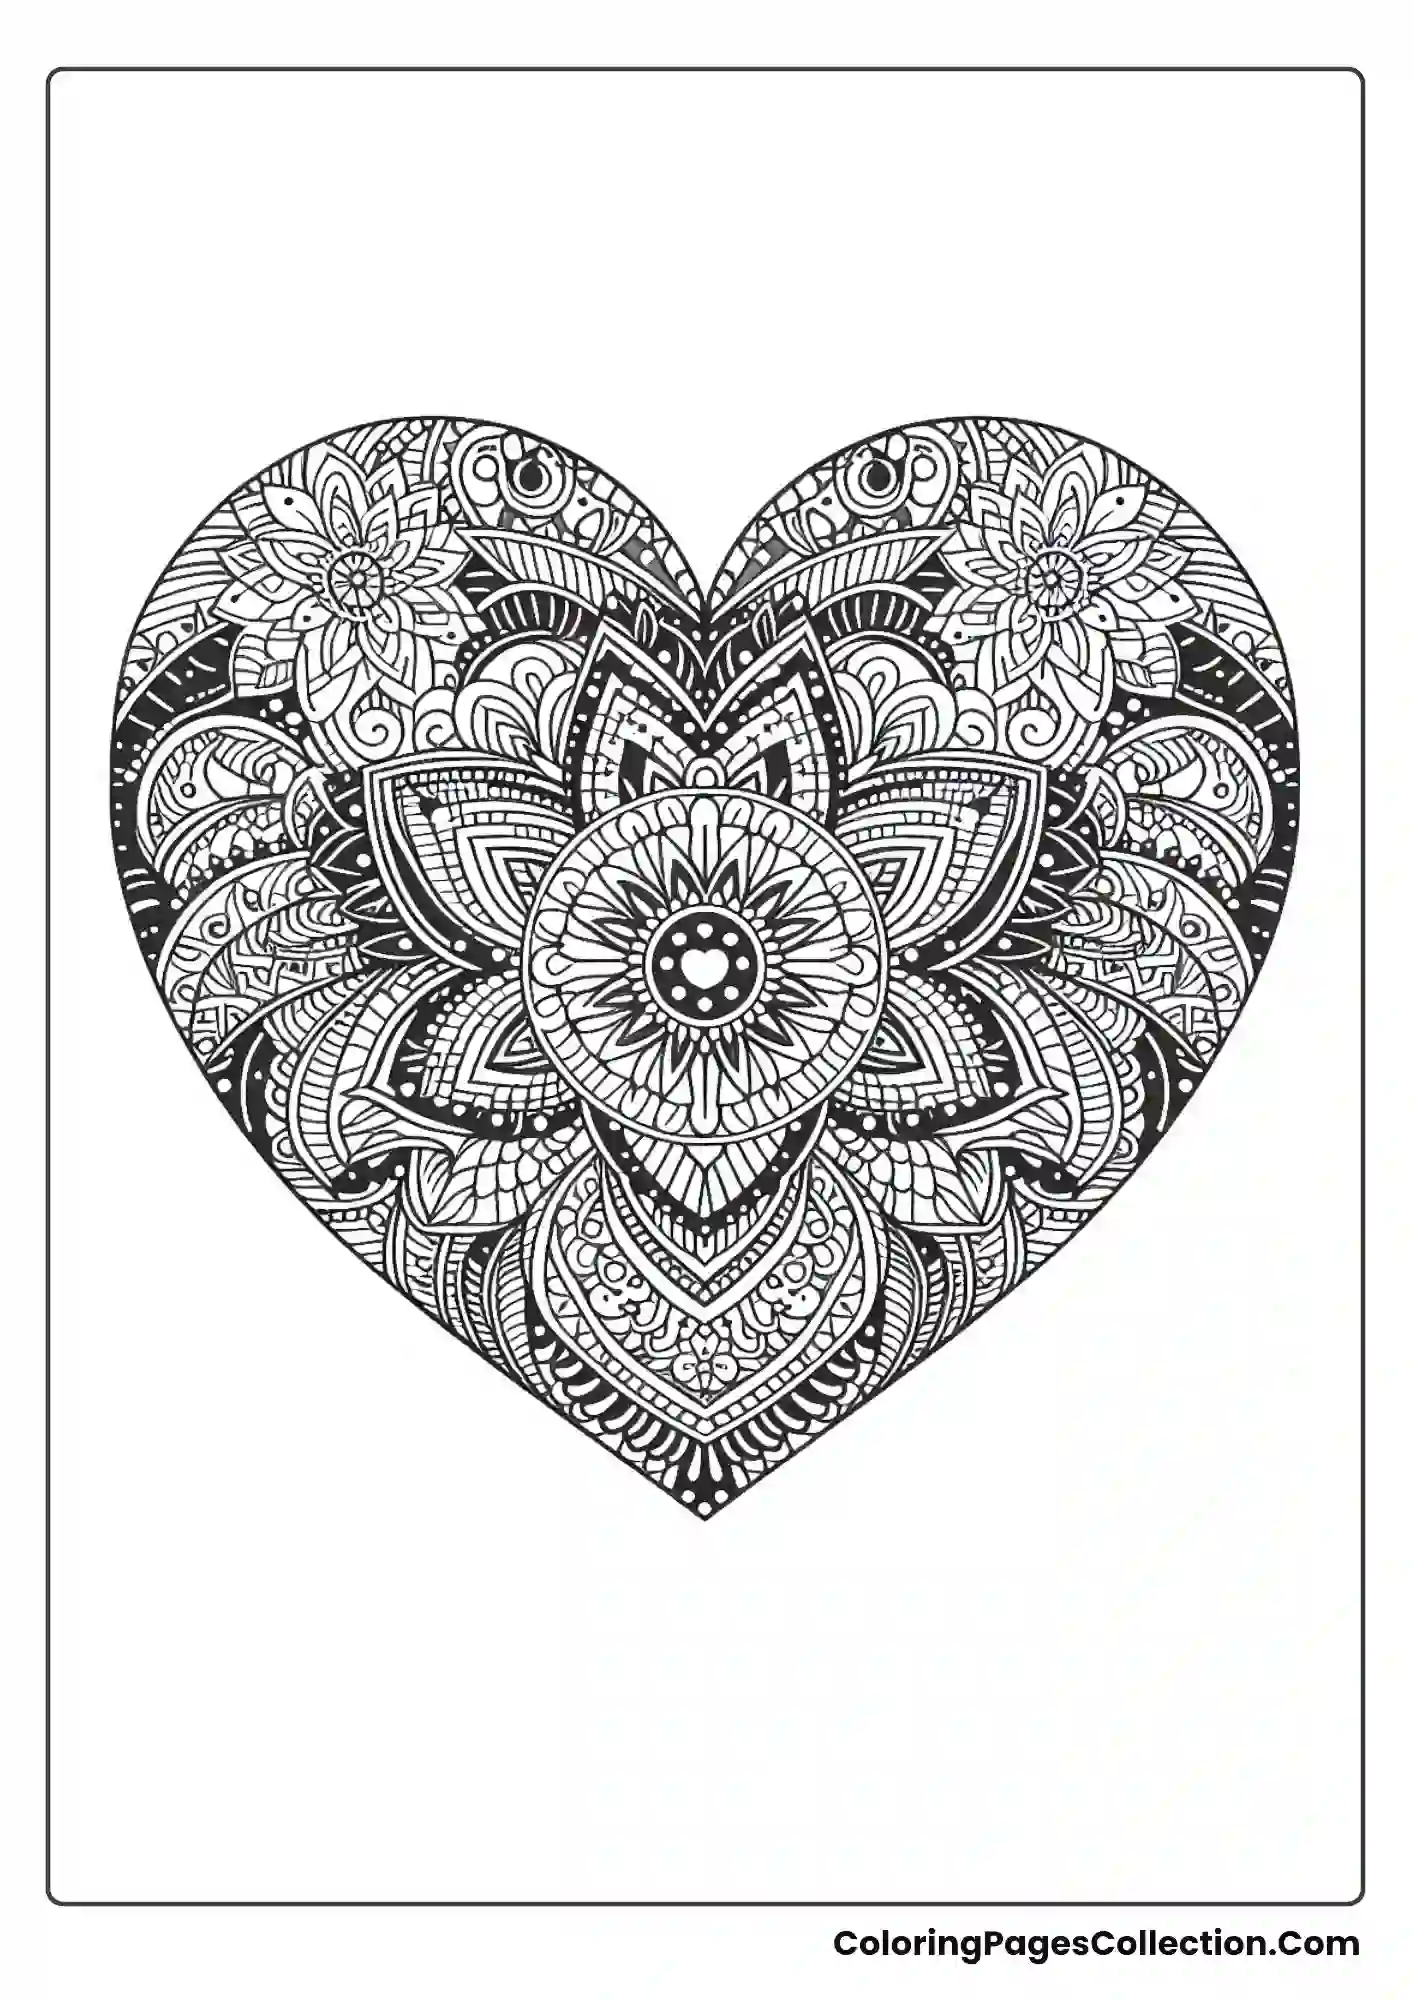 A Heart Filled With Intricate Mandala Patterns